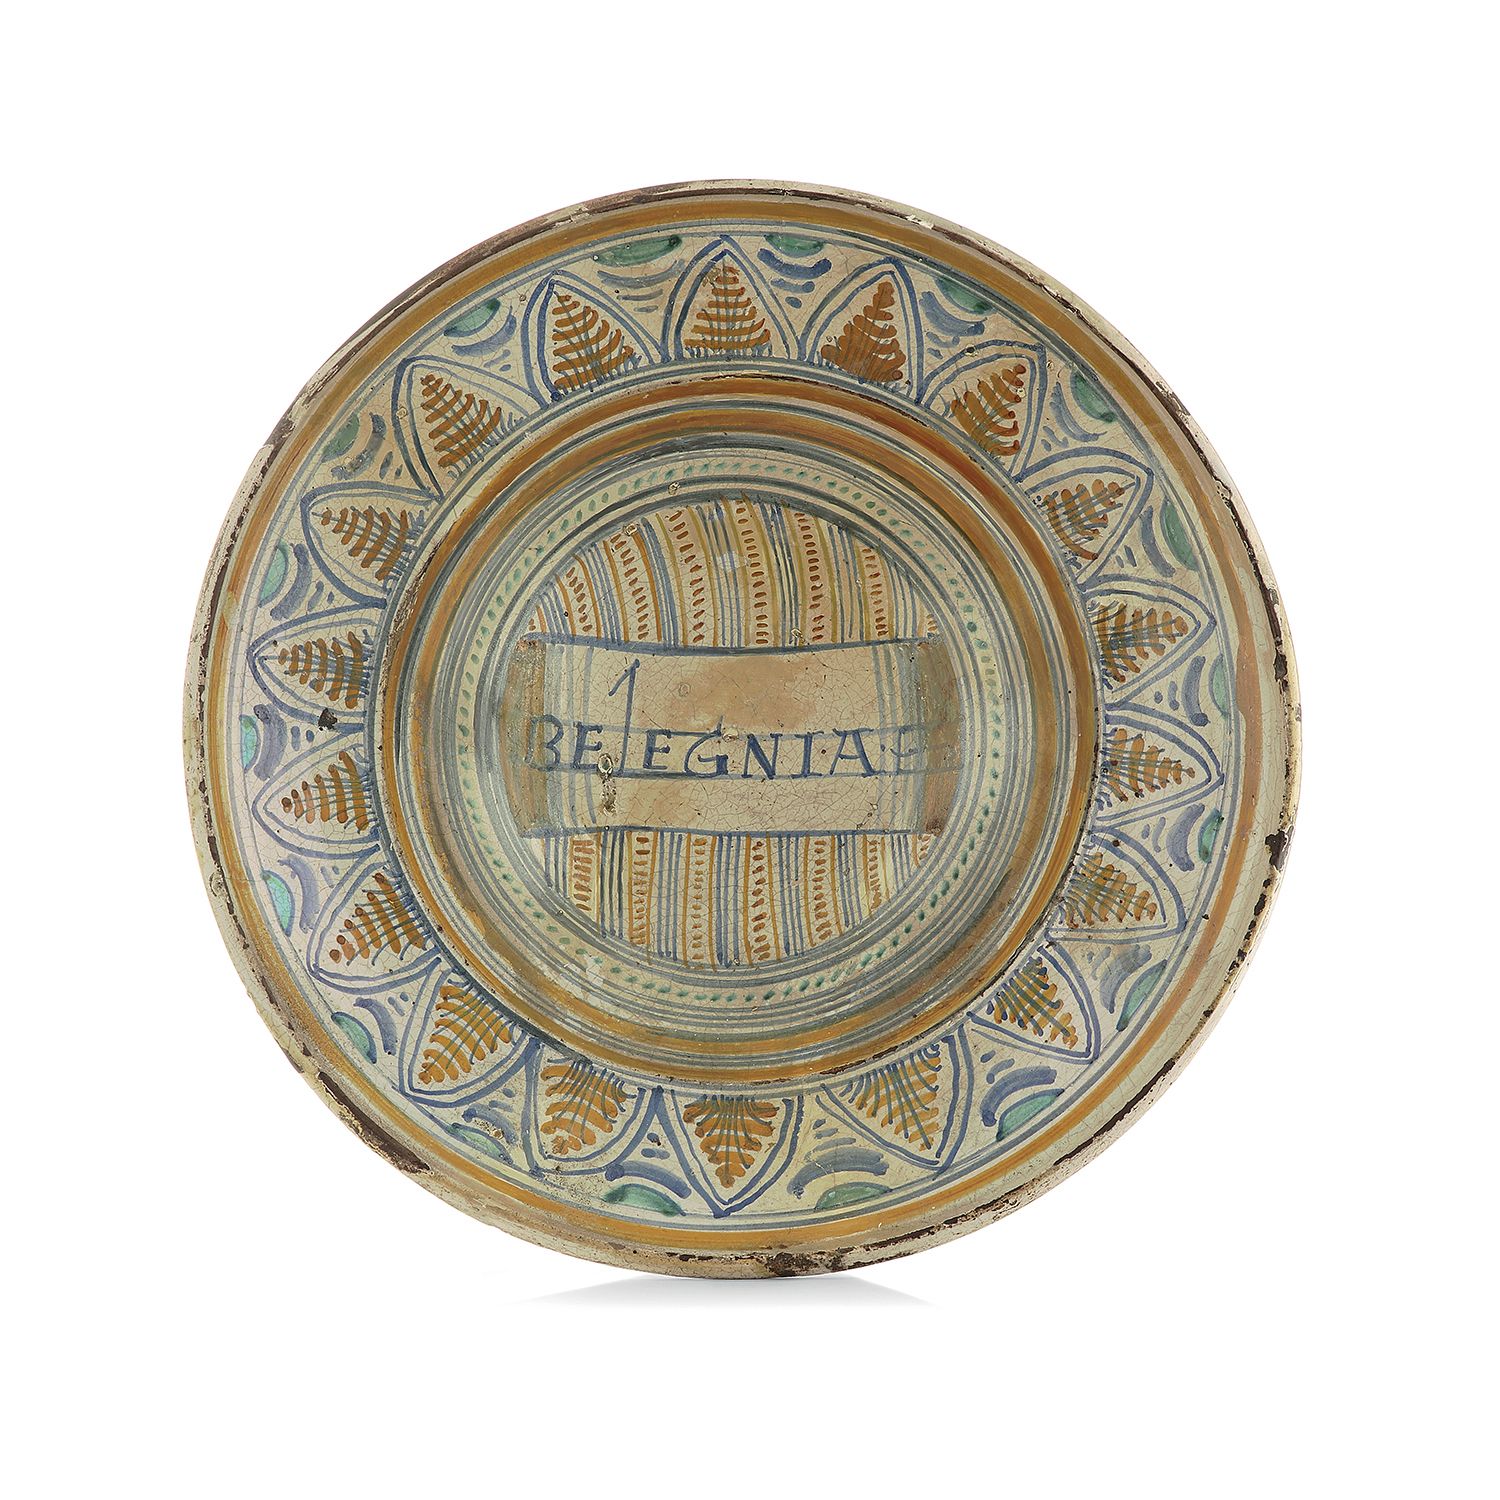 Null ROUND PLAT, DERUTA, late 16th century, early 17th century

Majolica with po&hellip;